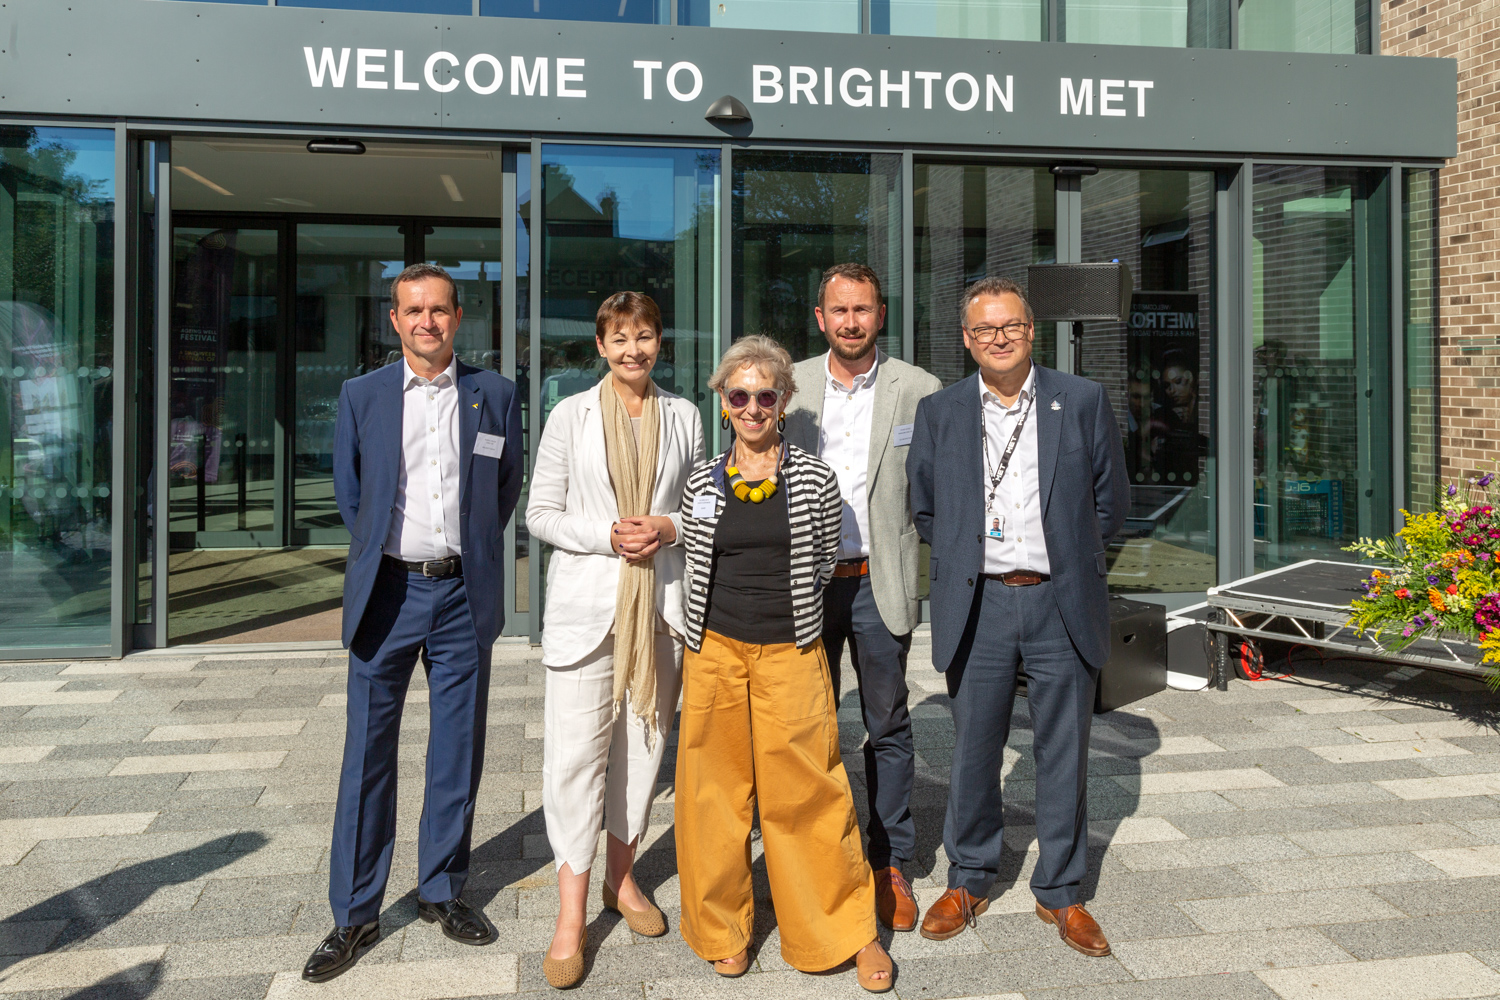 Willmott Dixon Director Russell Miller, Caroline Lucas MP, GB MET Chair of Governors Sue Berelowitz, ECE Architecture Managing Director Stuart Eatock, and GB MET CEO Andy Cole outside of the new Brighton MET building.